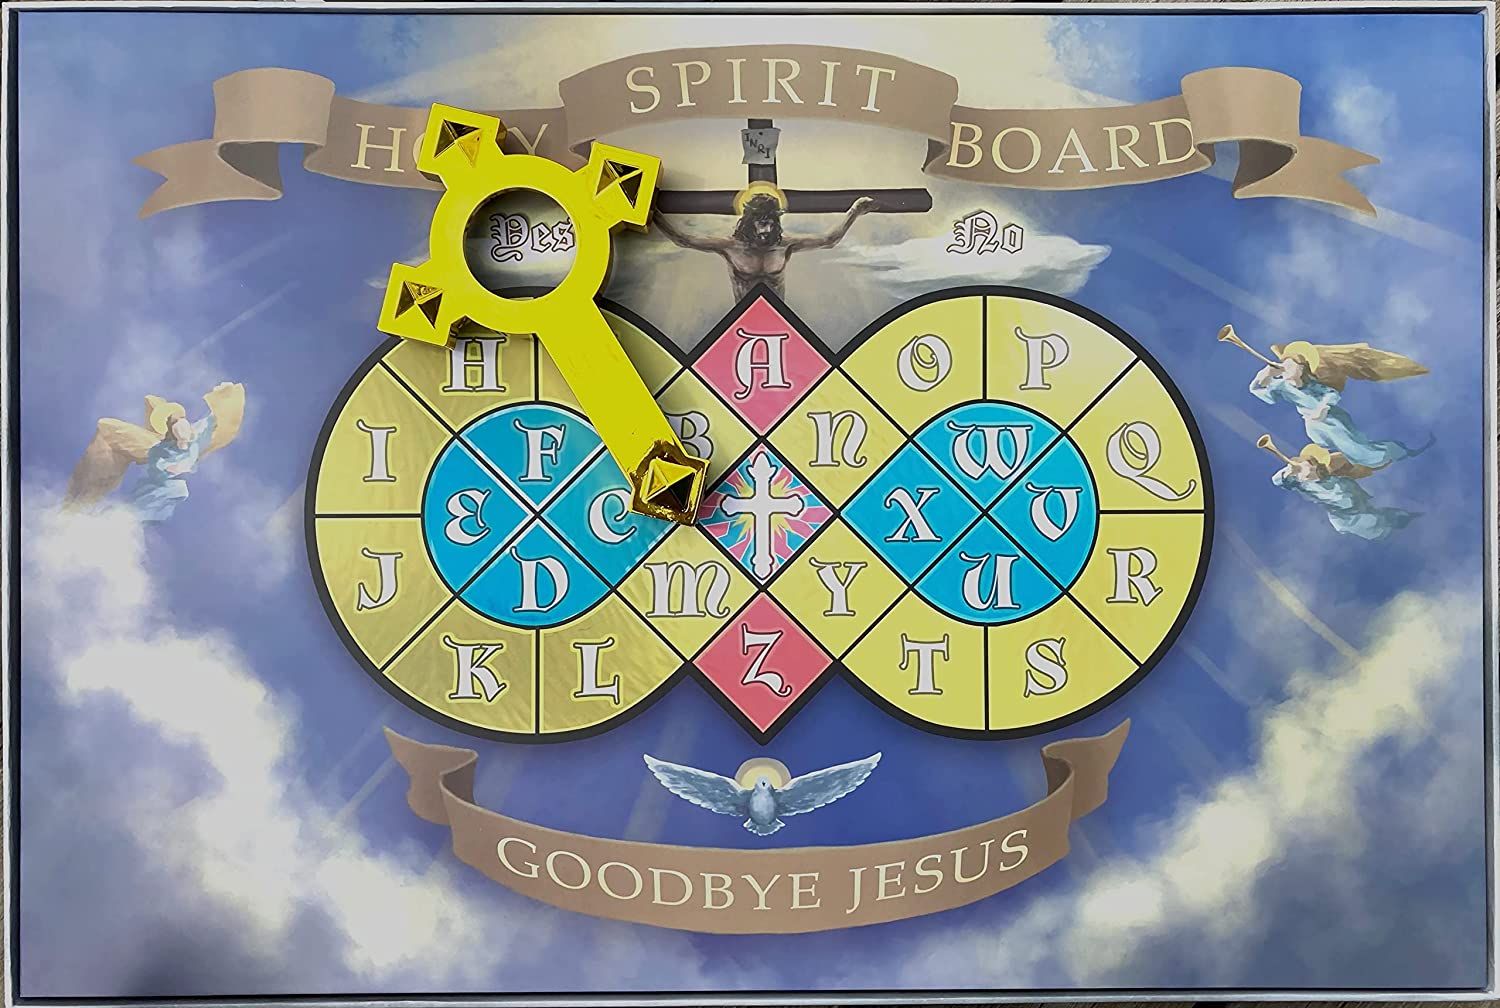 interior board and planchette of holy spirit board